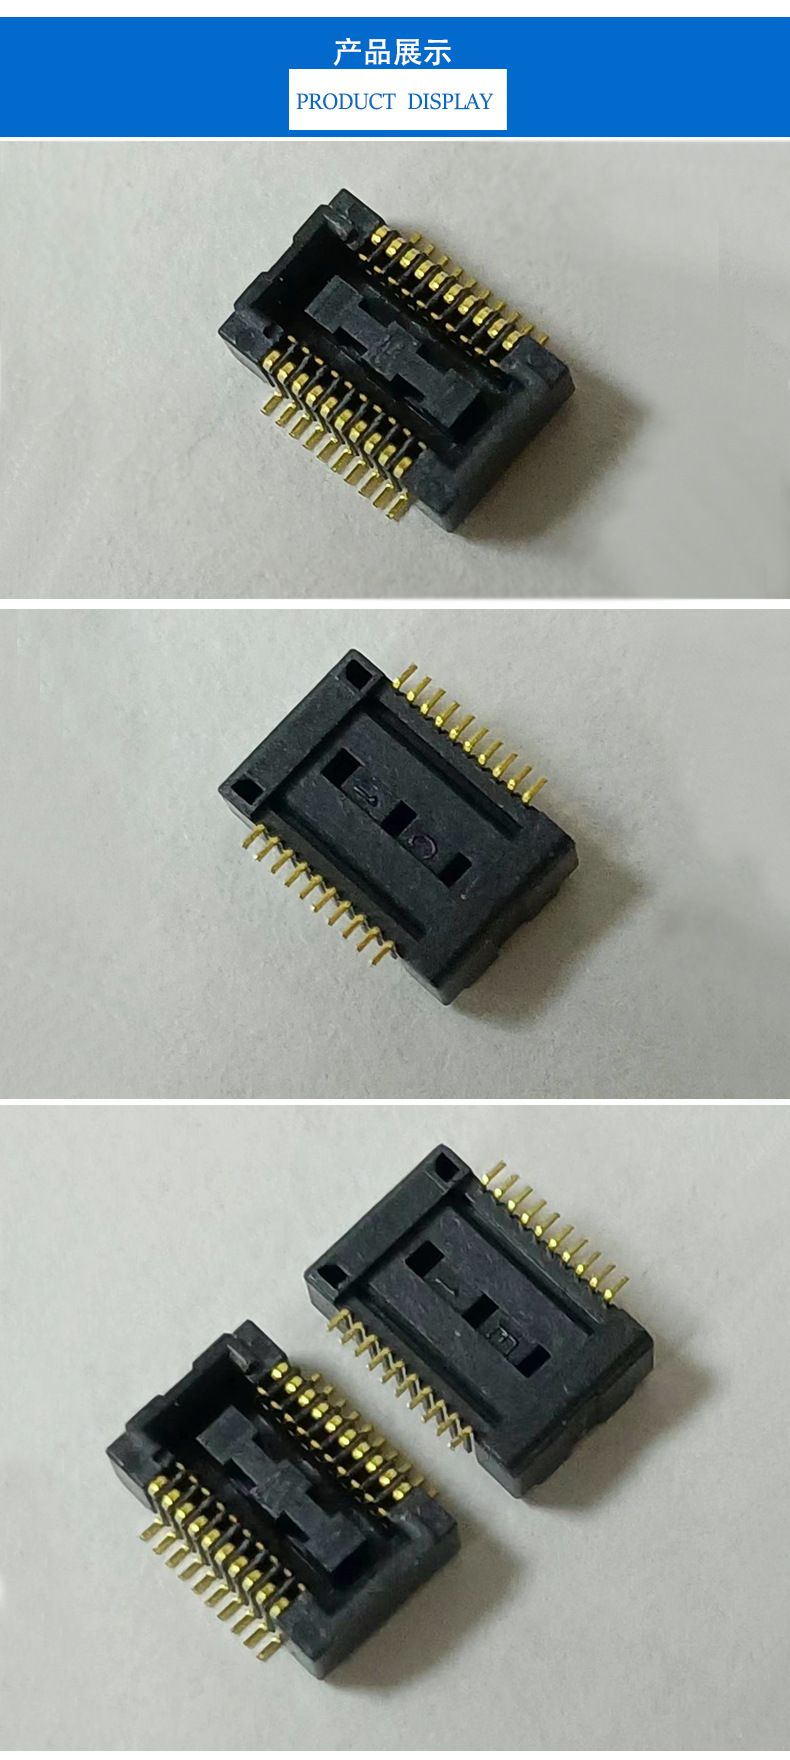 Compatible with Panasonic AXK720347G board to board connector socket 0.4mm narrow spacing female seat BF012030